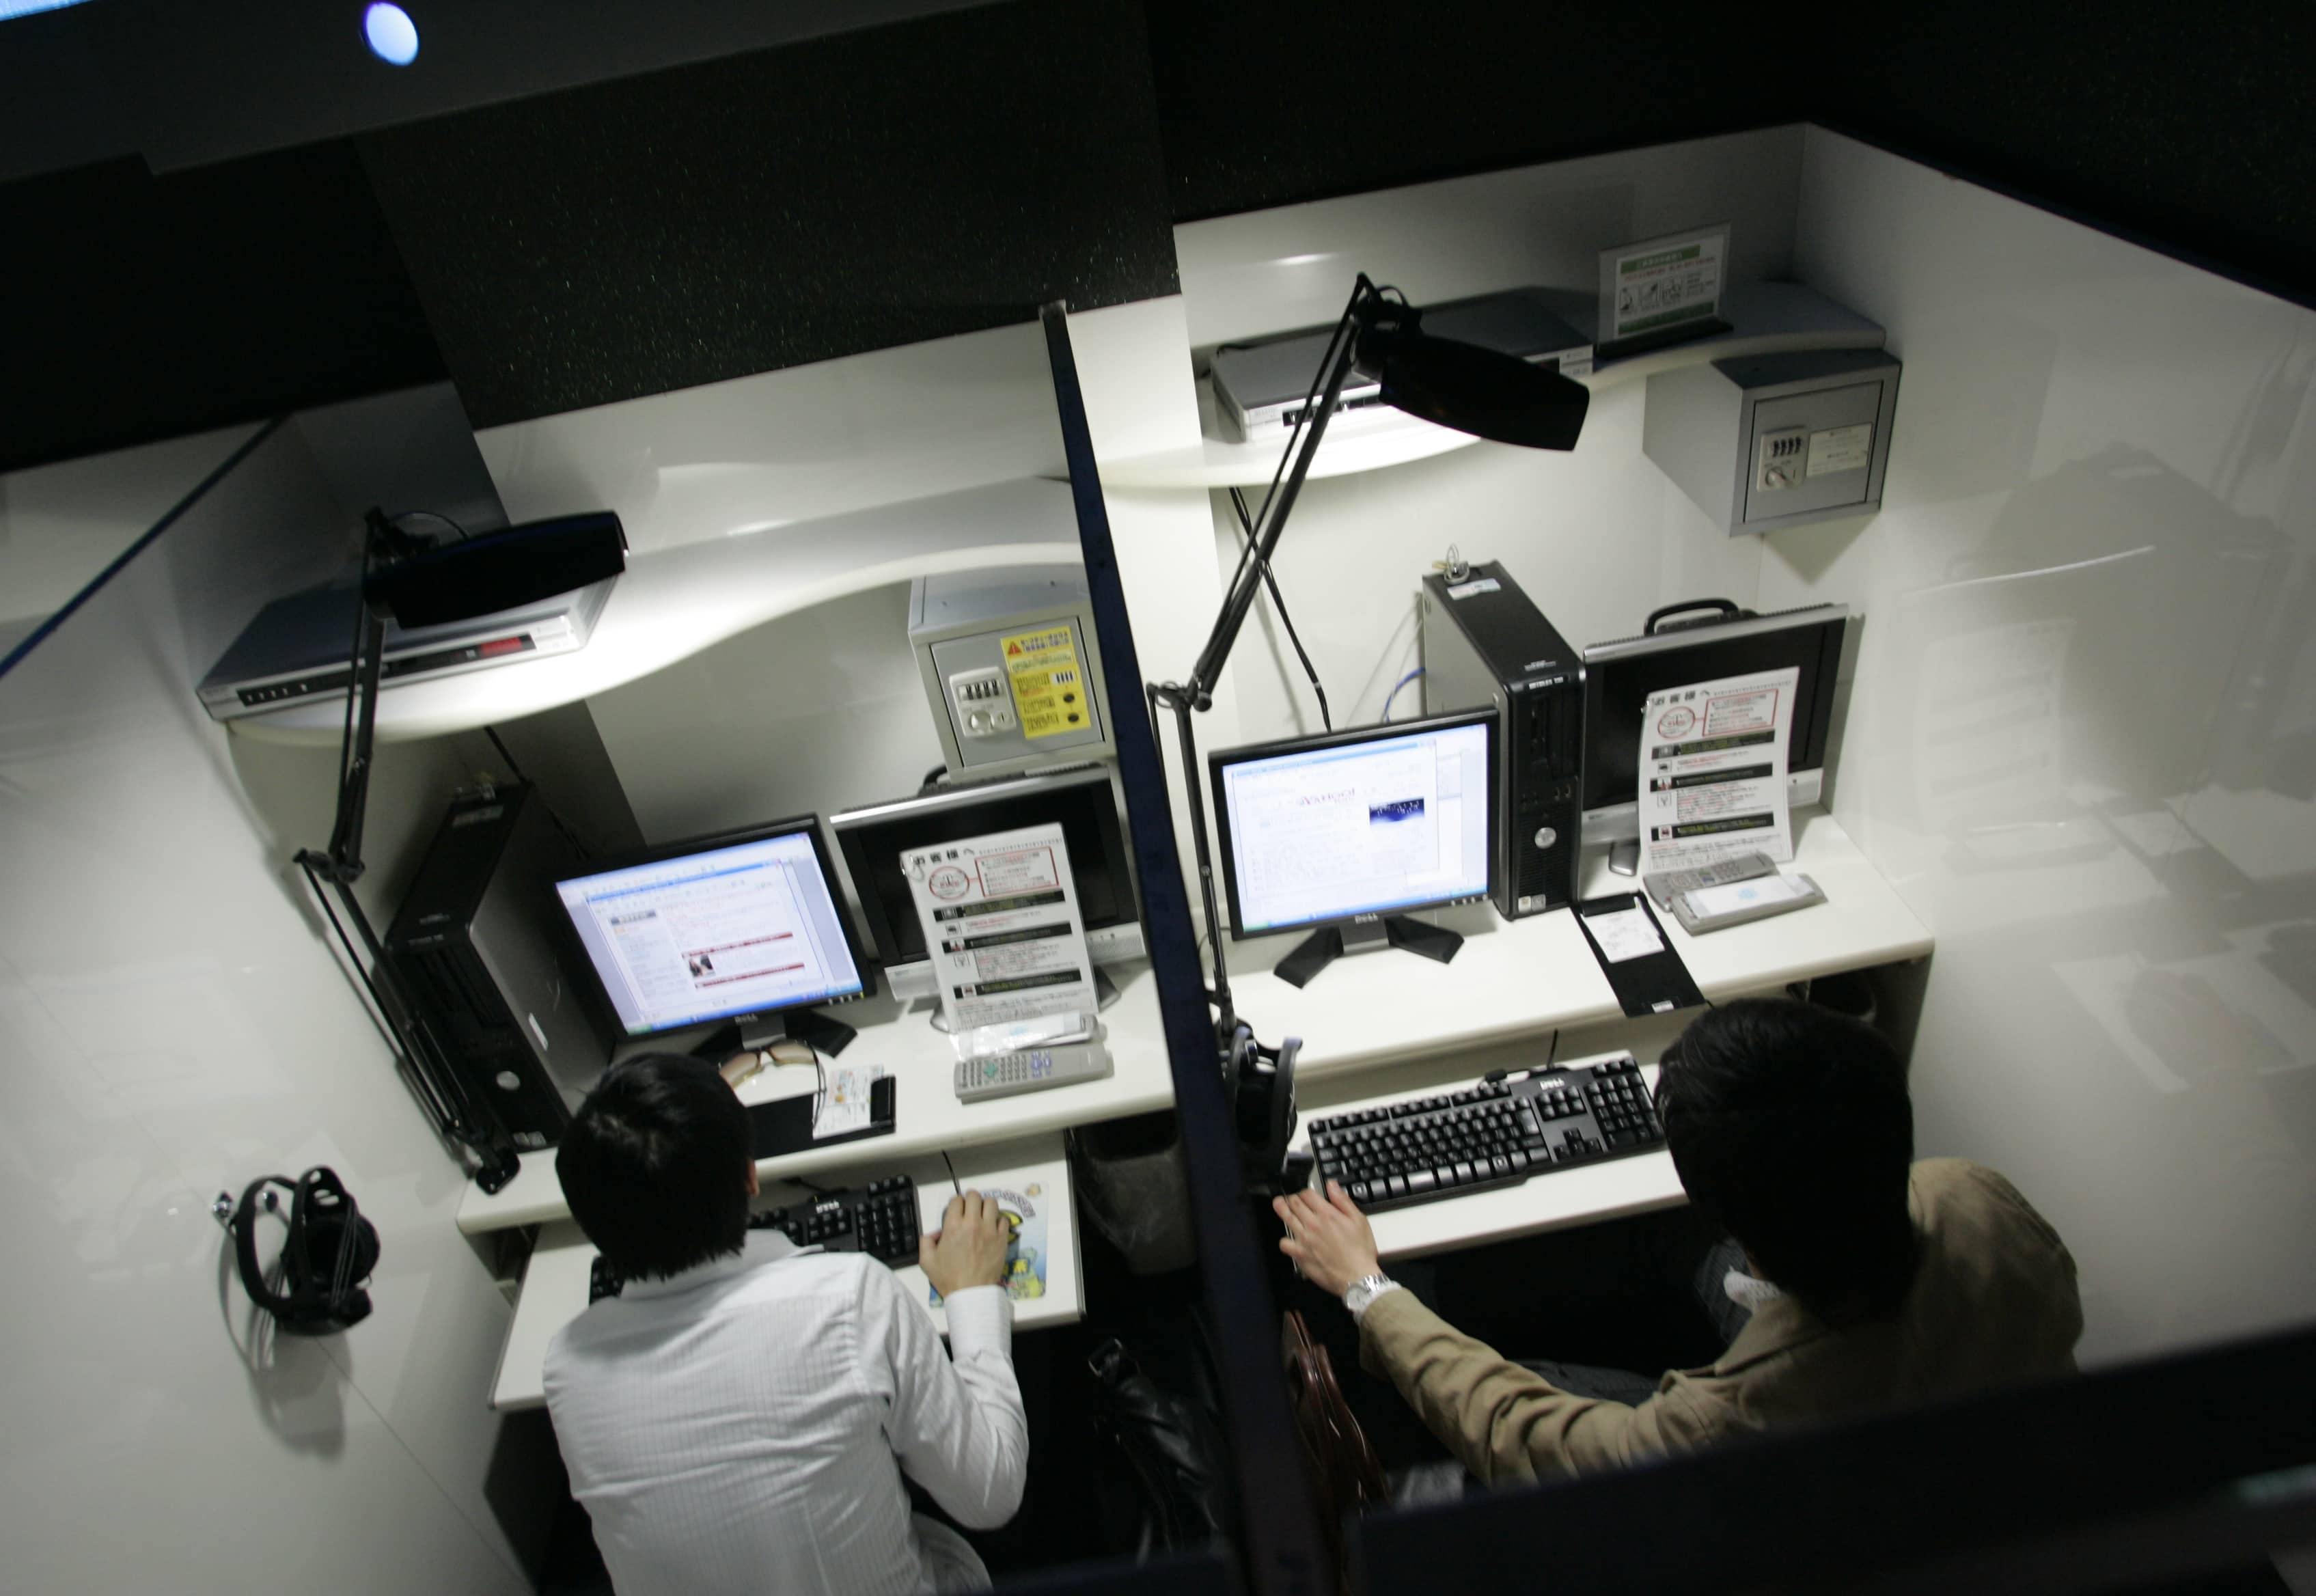 In this May 2007 file photo, men make use of the internet service in the private rooms of an internet cafe in Tokyo, REUTERS/Kim Kyung-Hoon